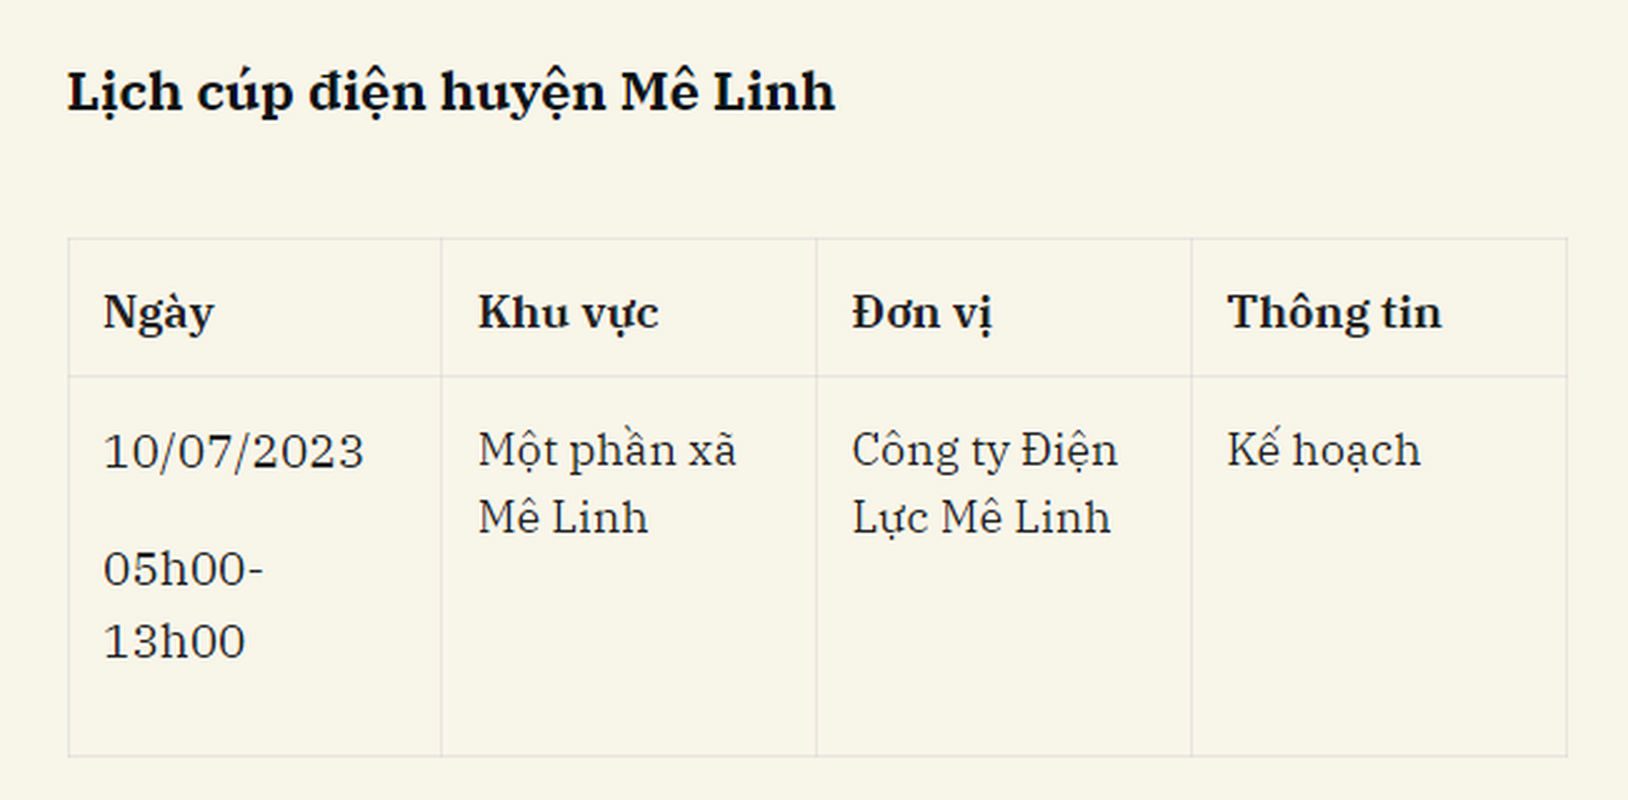 Lich cup dien Ha Noi ngay 10/7/2023-Hinh-5